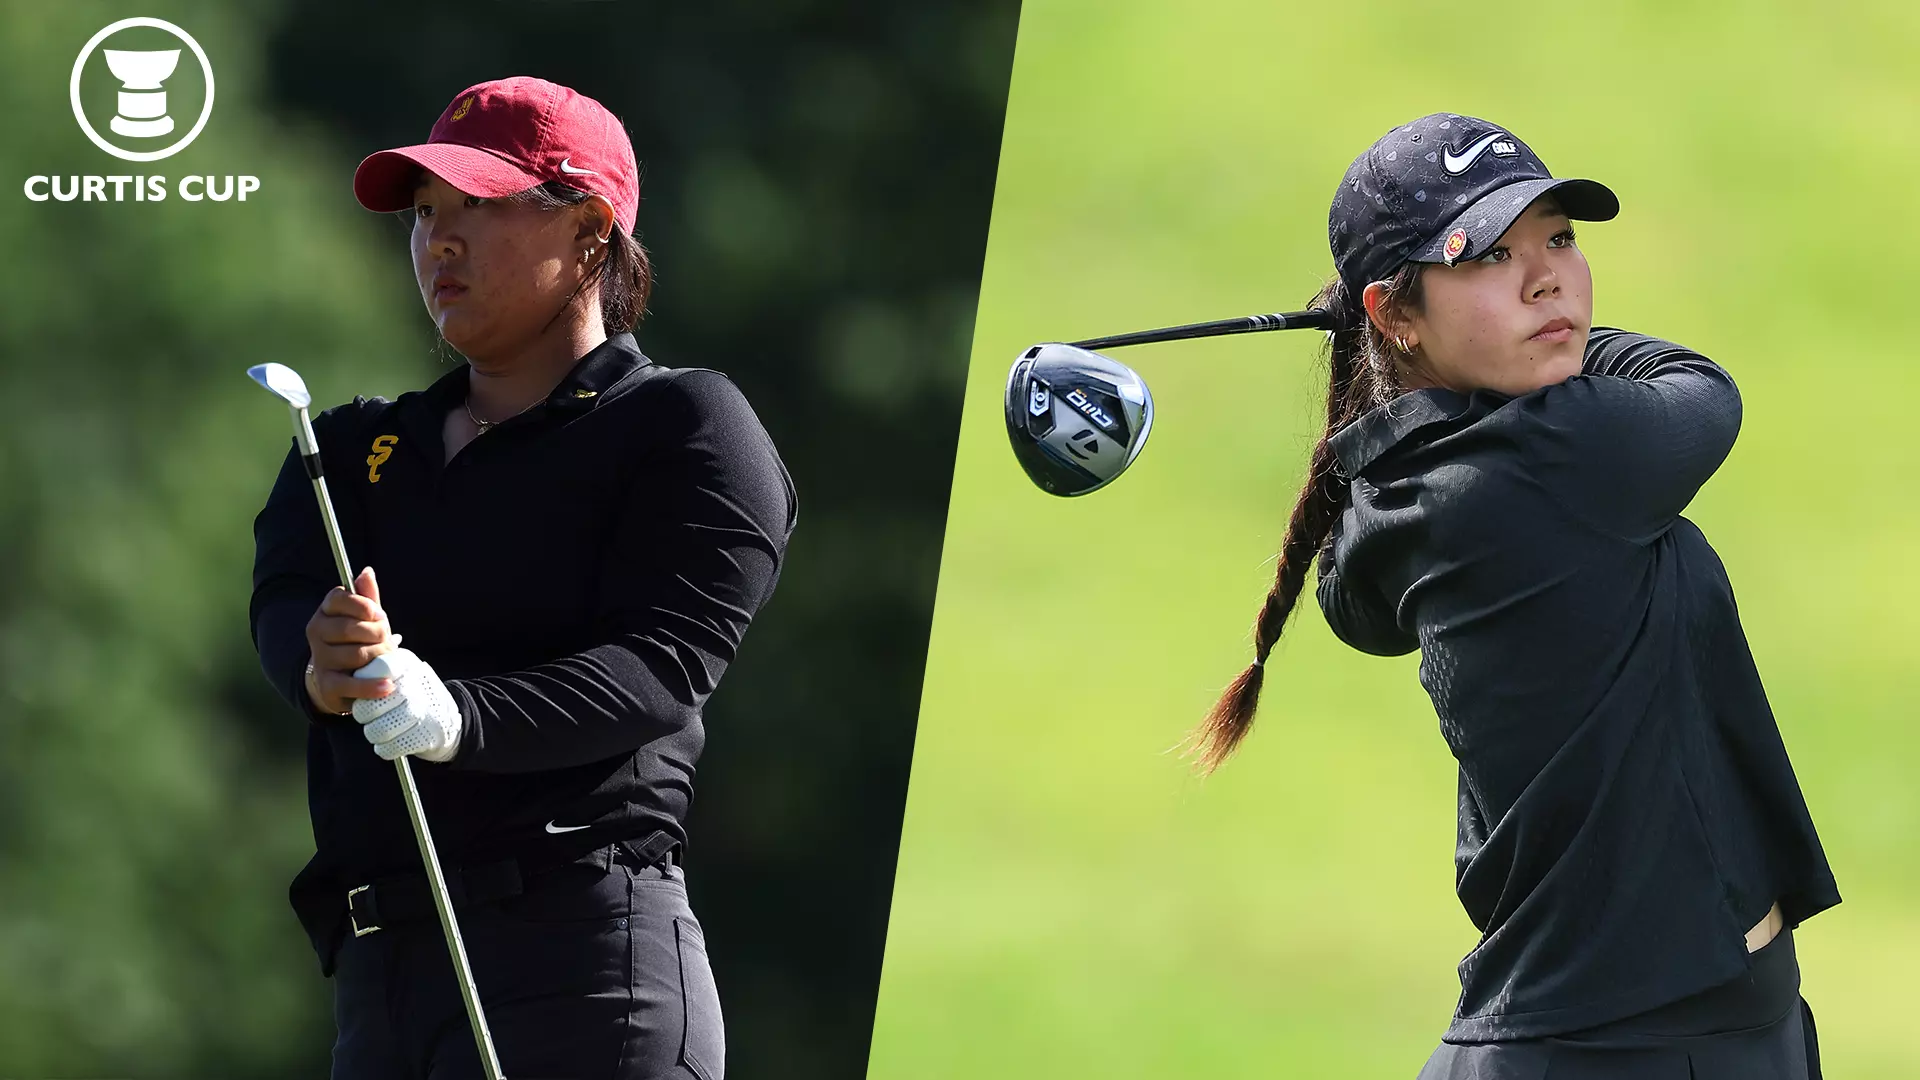 USC’s Catherine Park and Jasmine Koo Named to U.S. Curtis Cup Team